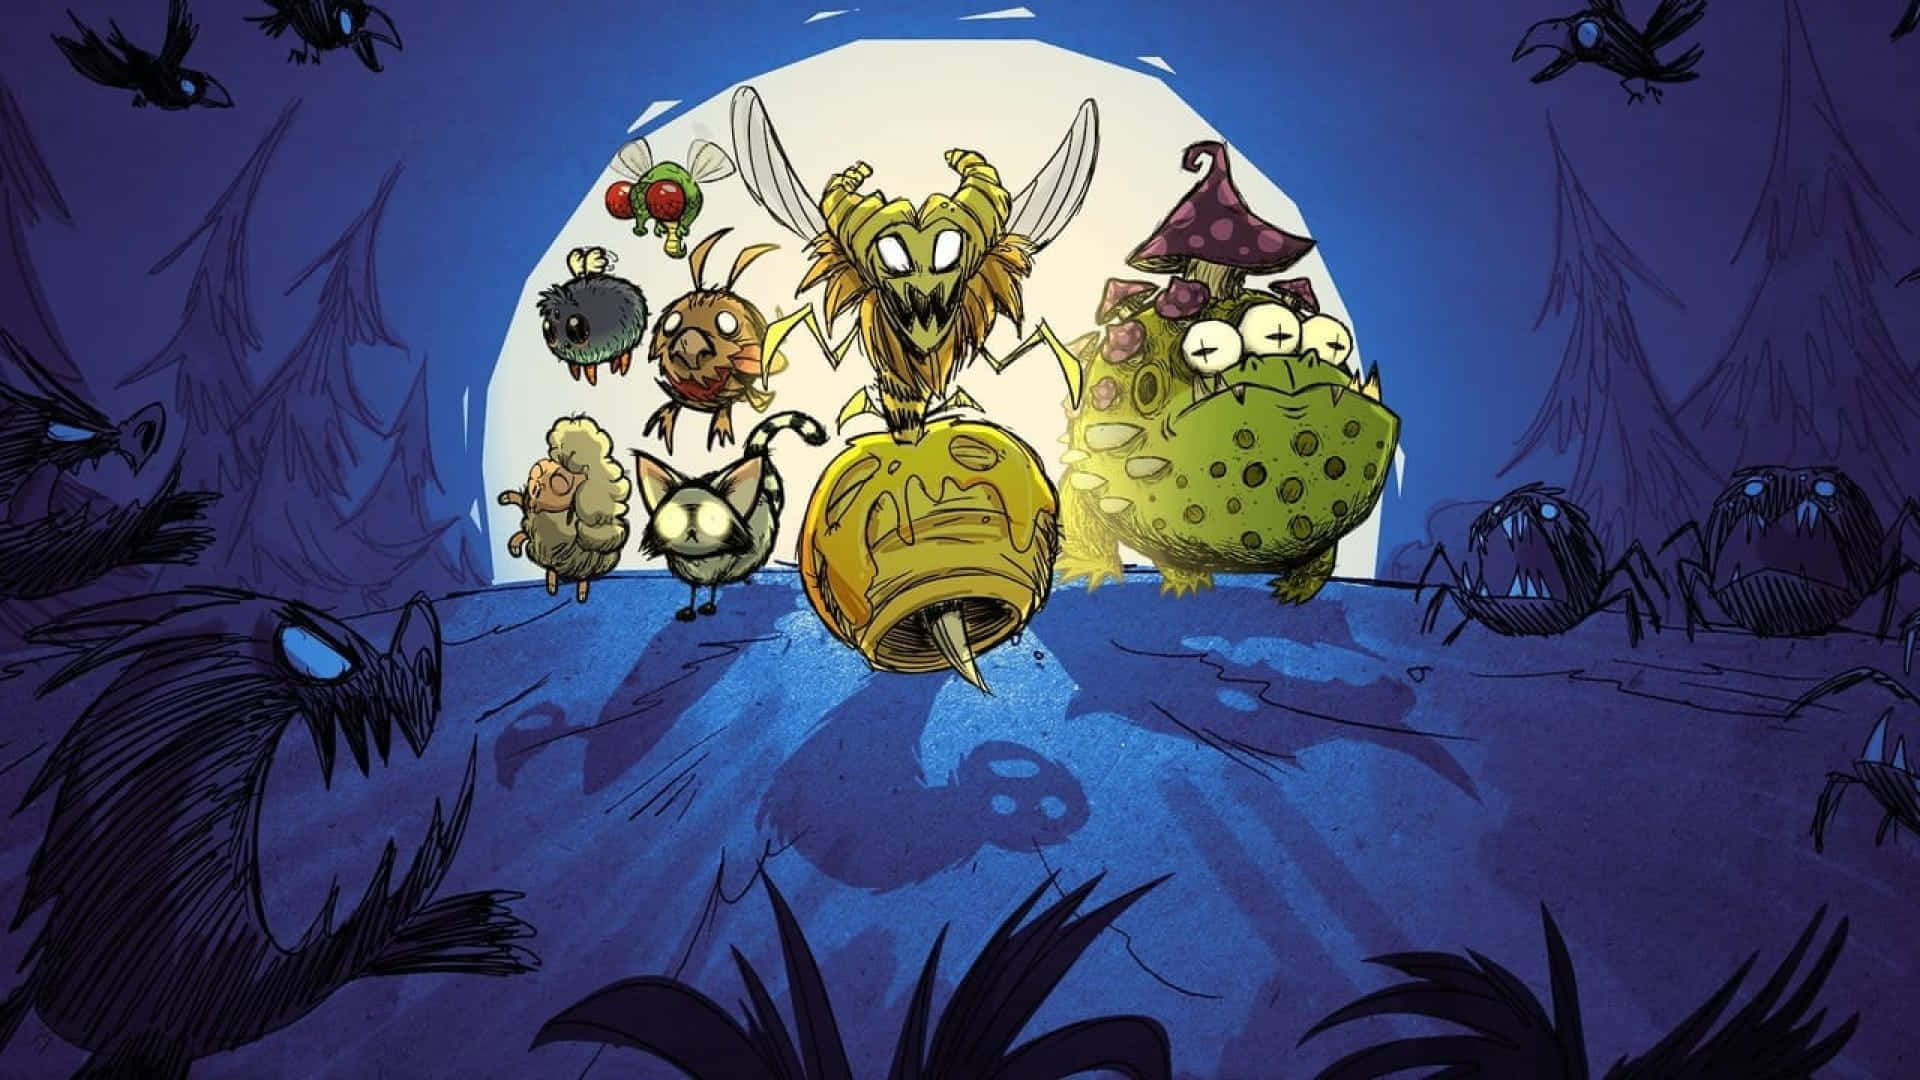 Use wits and cunning to survive in the wilderness of Don't Starve Wallpaper